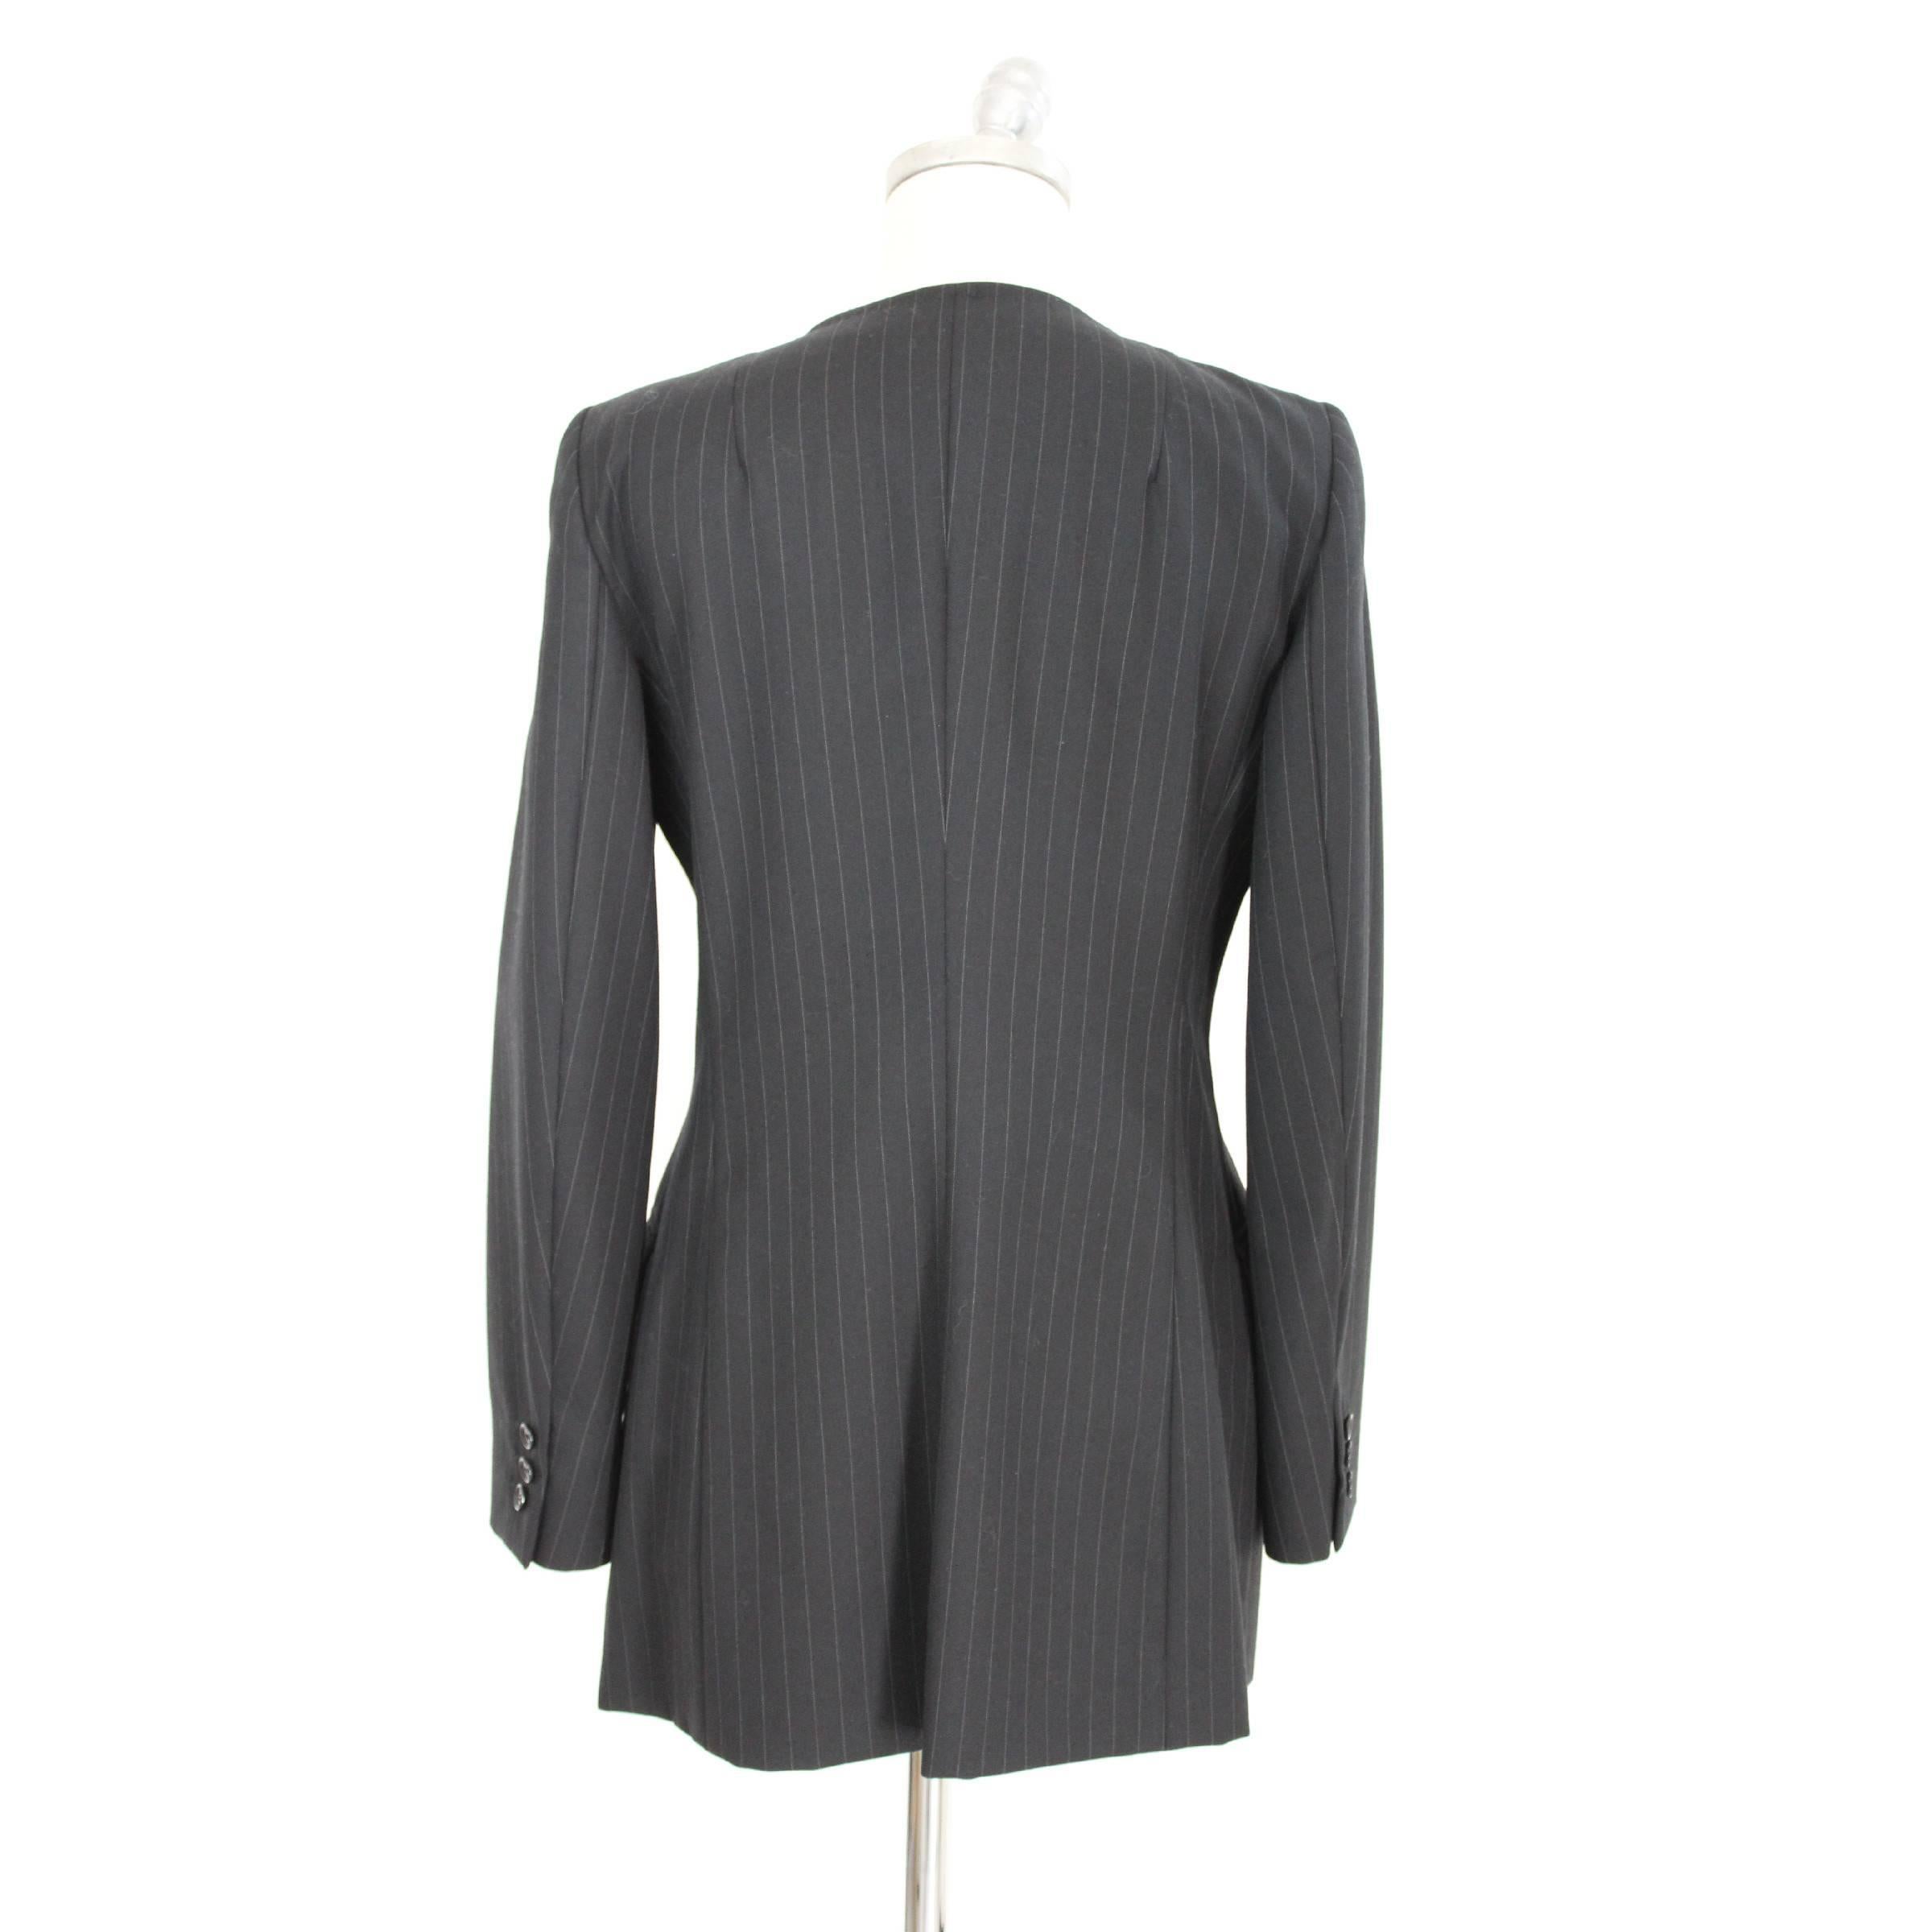 Dolce & Gabbana v-neck jacket, black pinstripe wool. It has a slim fit. Red lining with logo. Closed front pockets sewn. Excellent vintage conditions.

Size 44 IT 10 US 12 UK

Shoulder: 44 cm
Bust / Chest: 48 cm
Sleeves: 62 cm
Length: 80